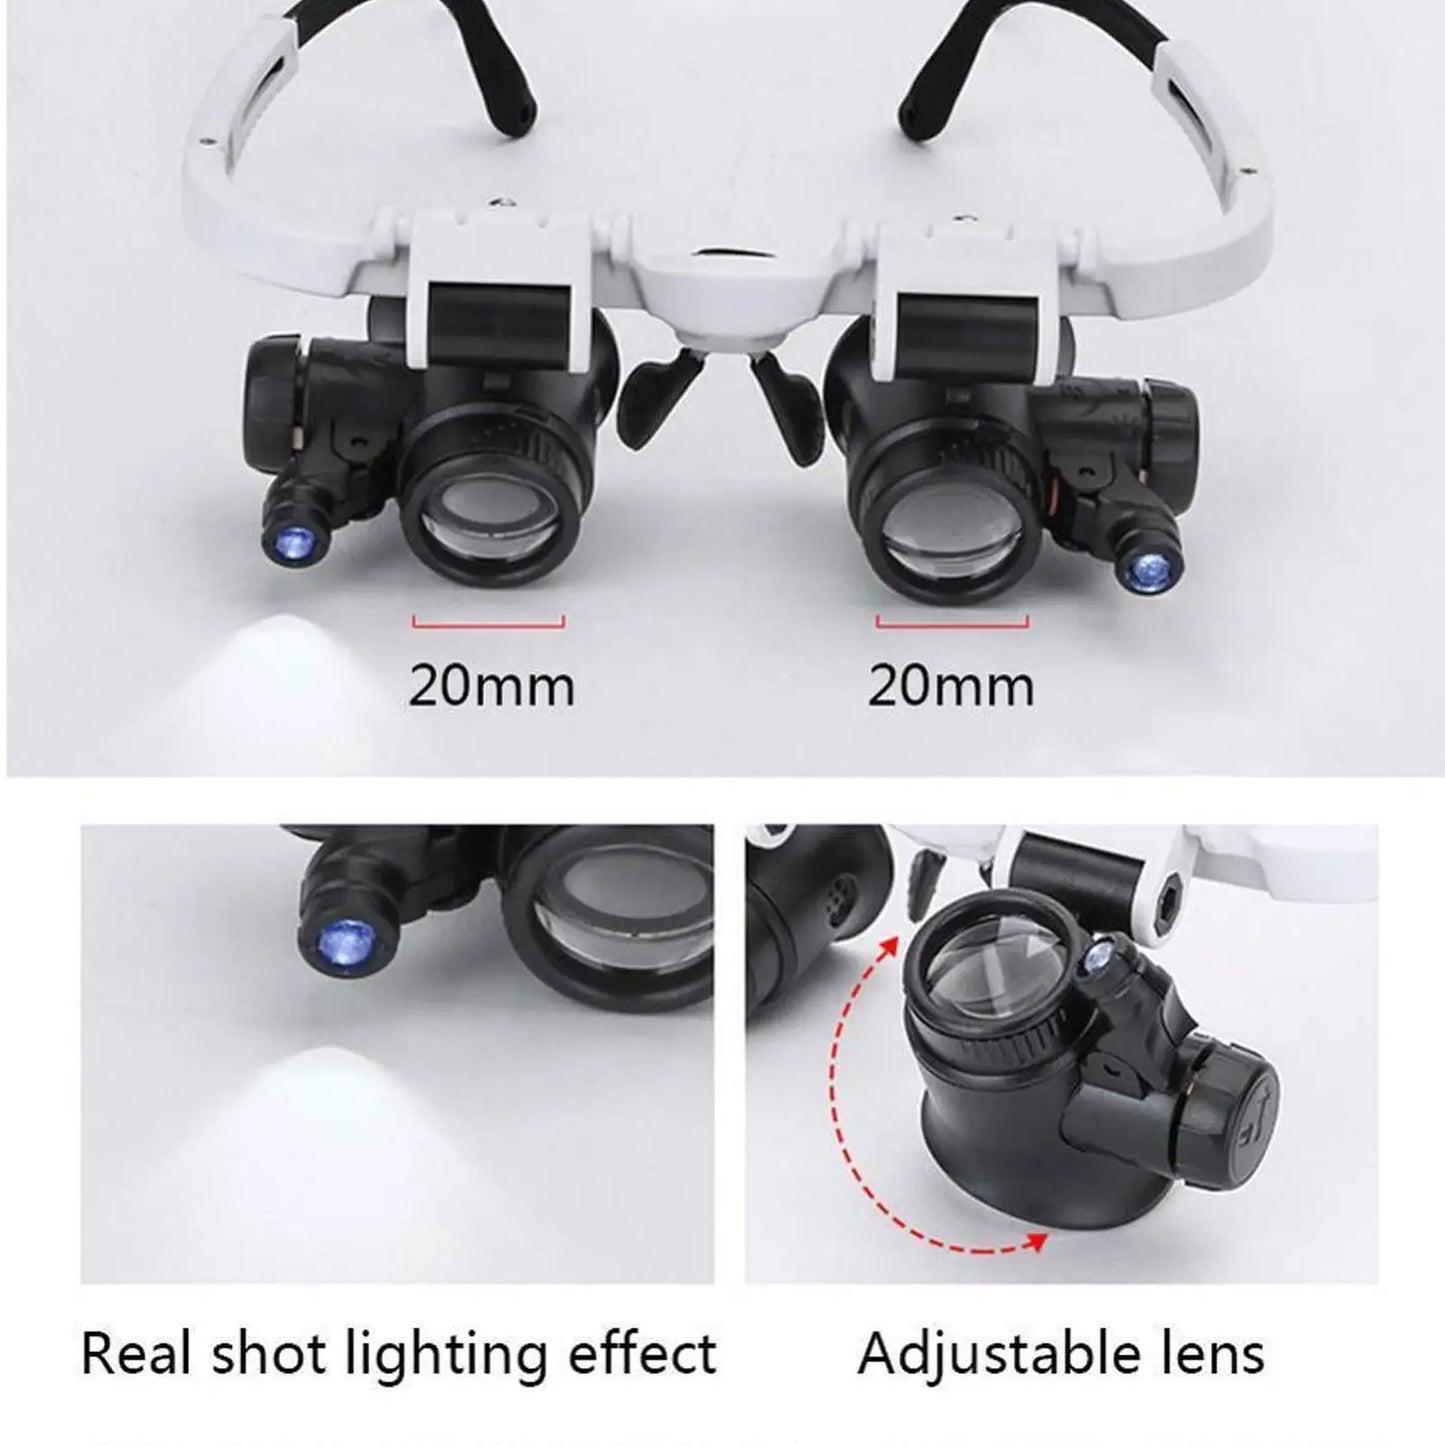 2XLED Watch Jeweler Repair Magnifier Head-Mounted Headband Adjustable Magnifying Head Eye Glasses Loupe Lens 8X 15X 23X